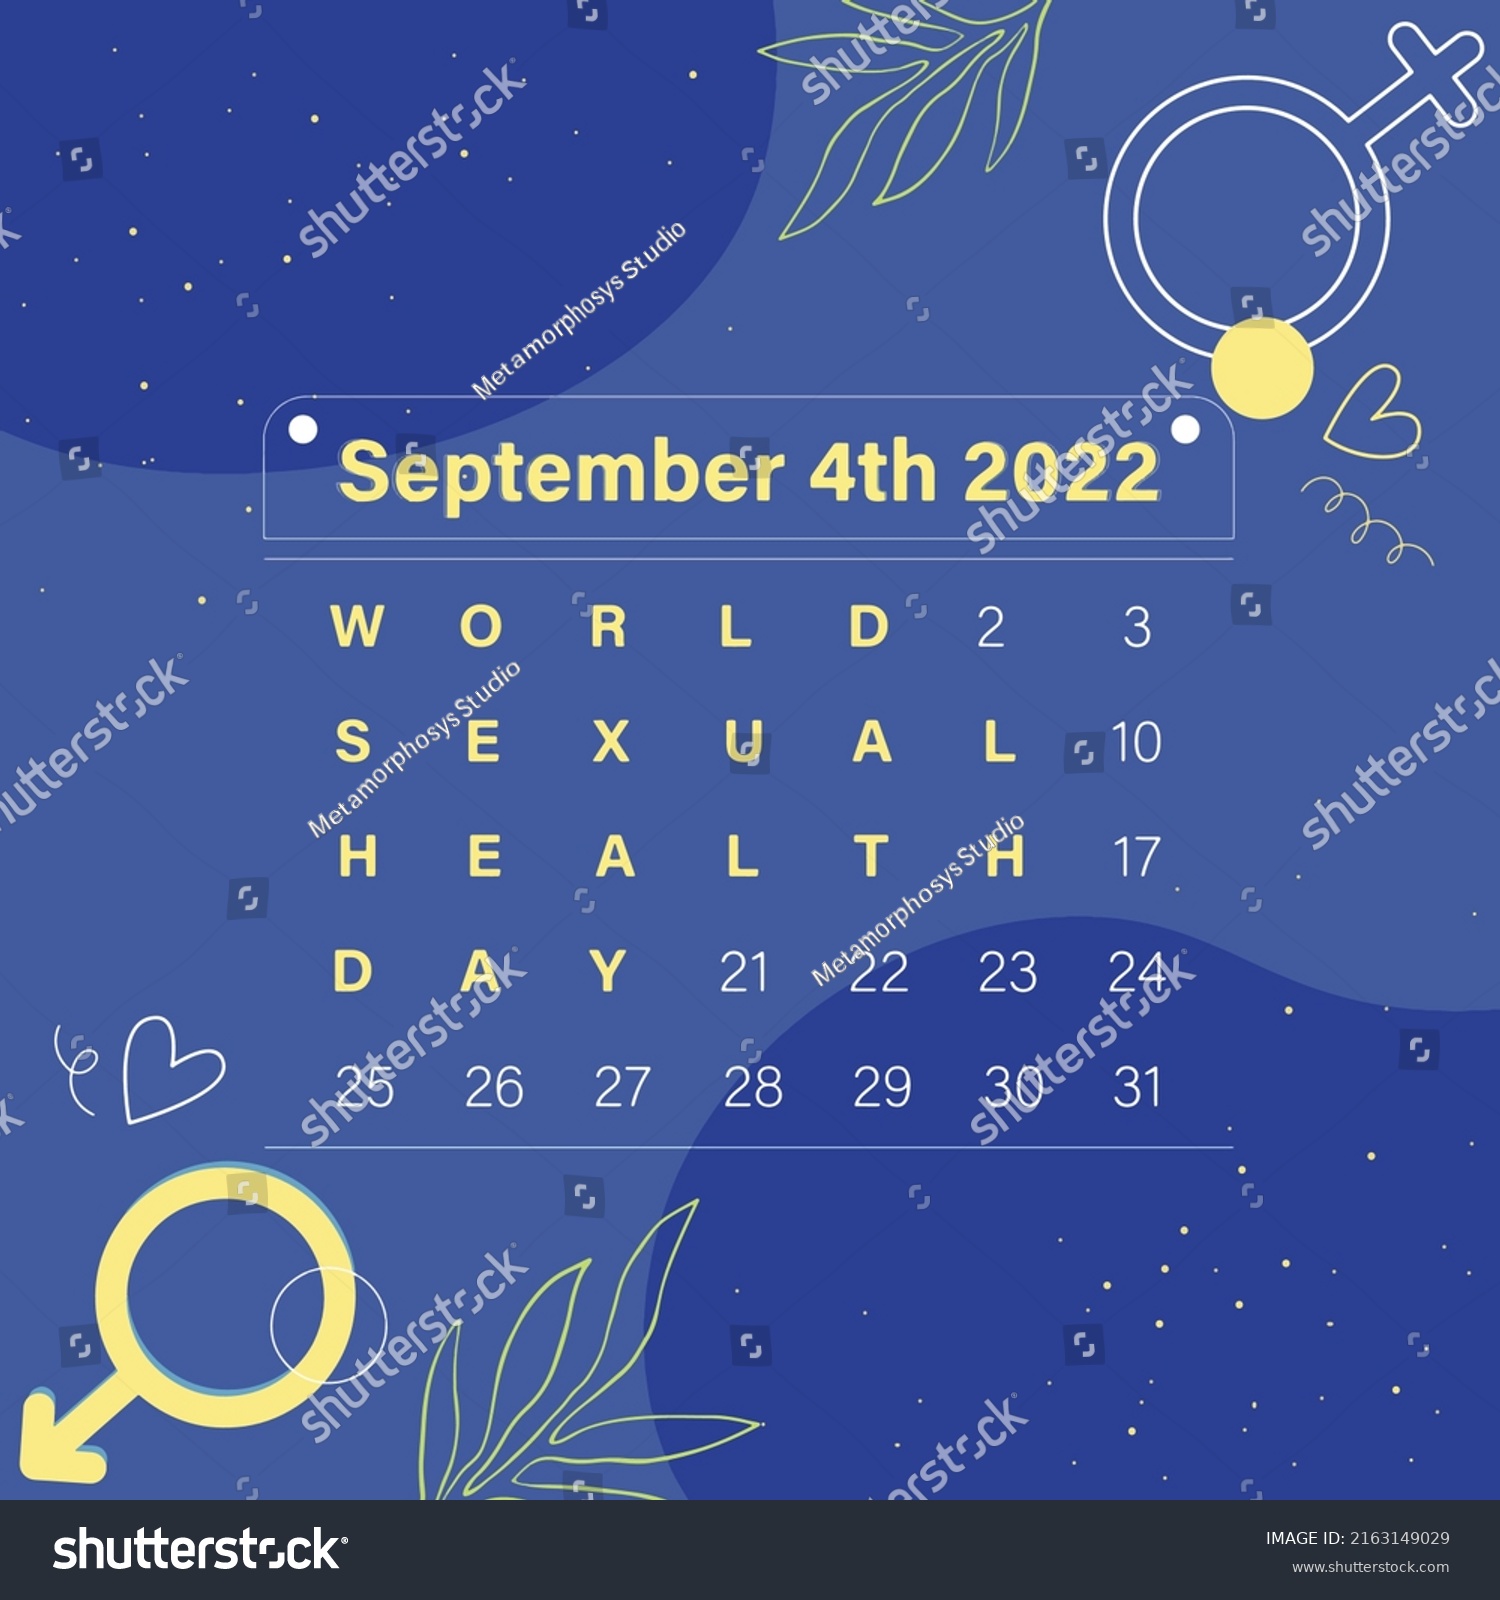 World Sexual Health Day Vector Illustration Stock Vector Royalty Free 2163149029 Shutterstock 